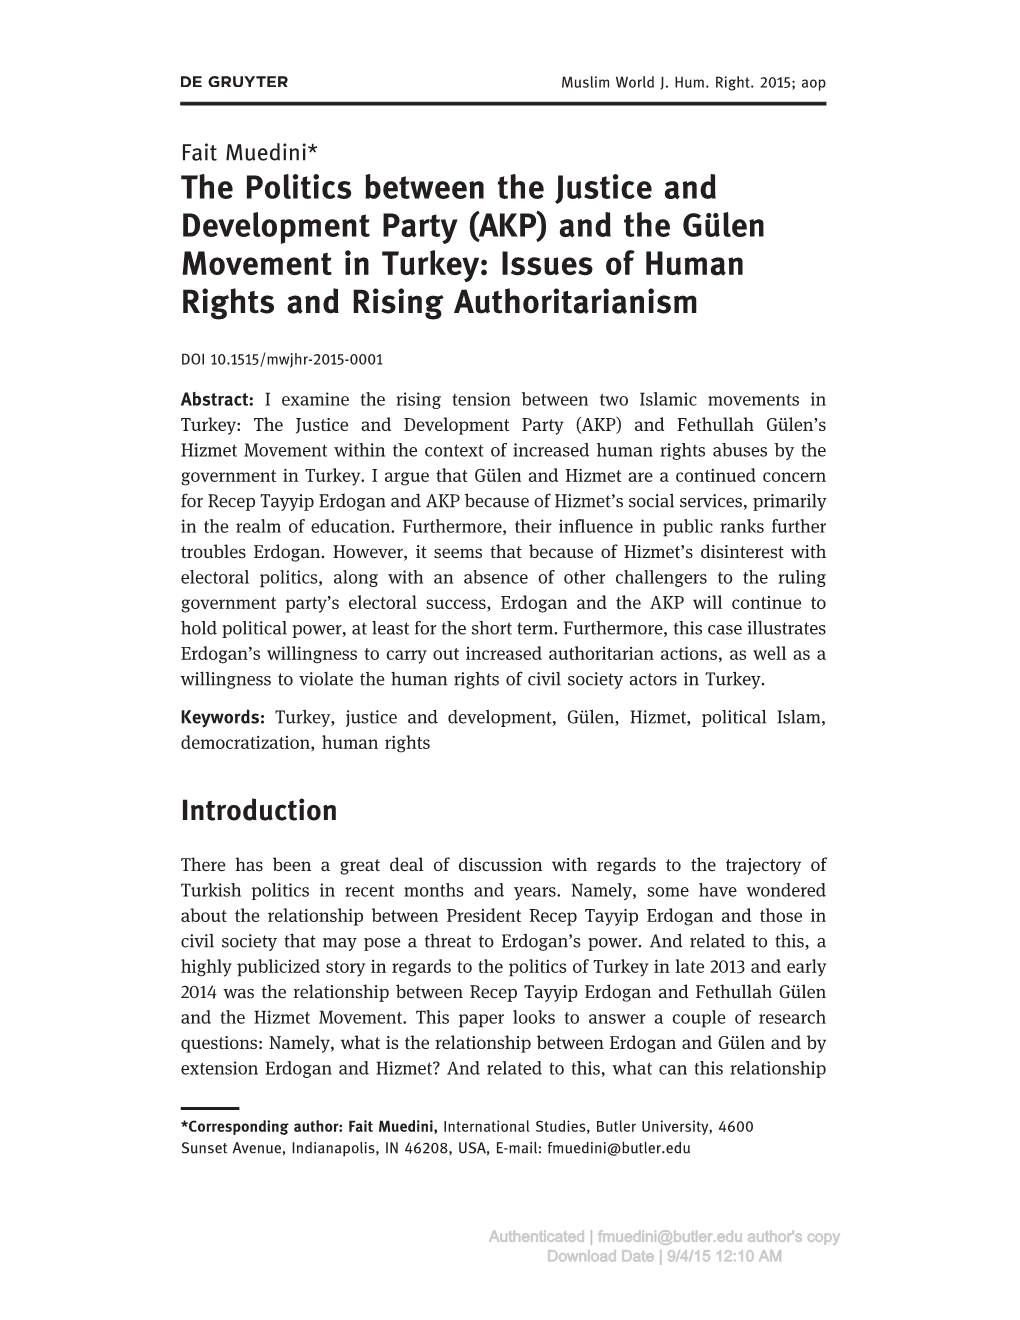 (AKP) and the Gülen Movement in Turkey: Issues of Human Rights and Rising Authoritarianism